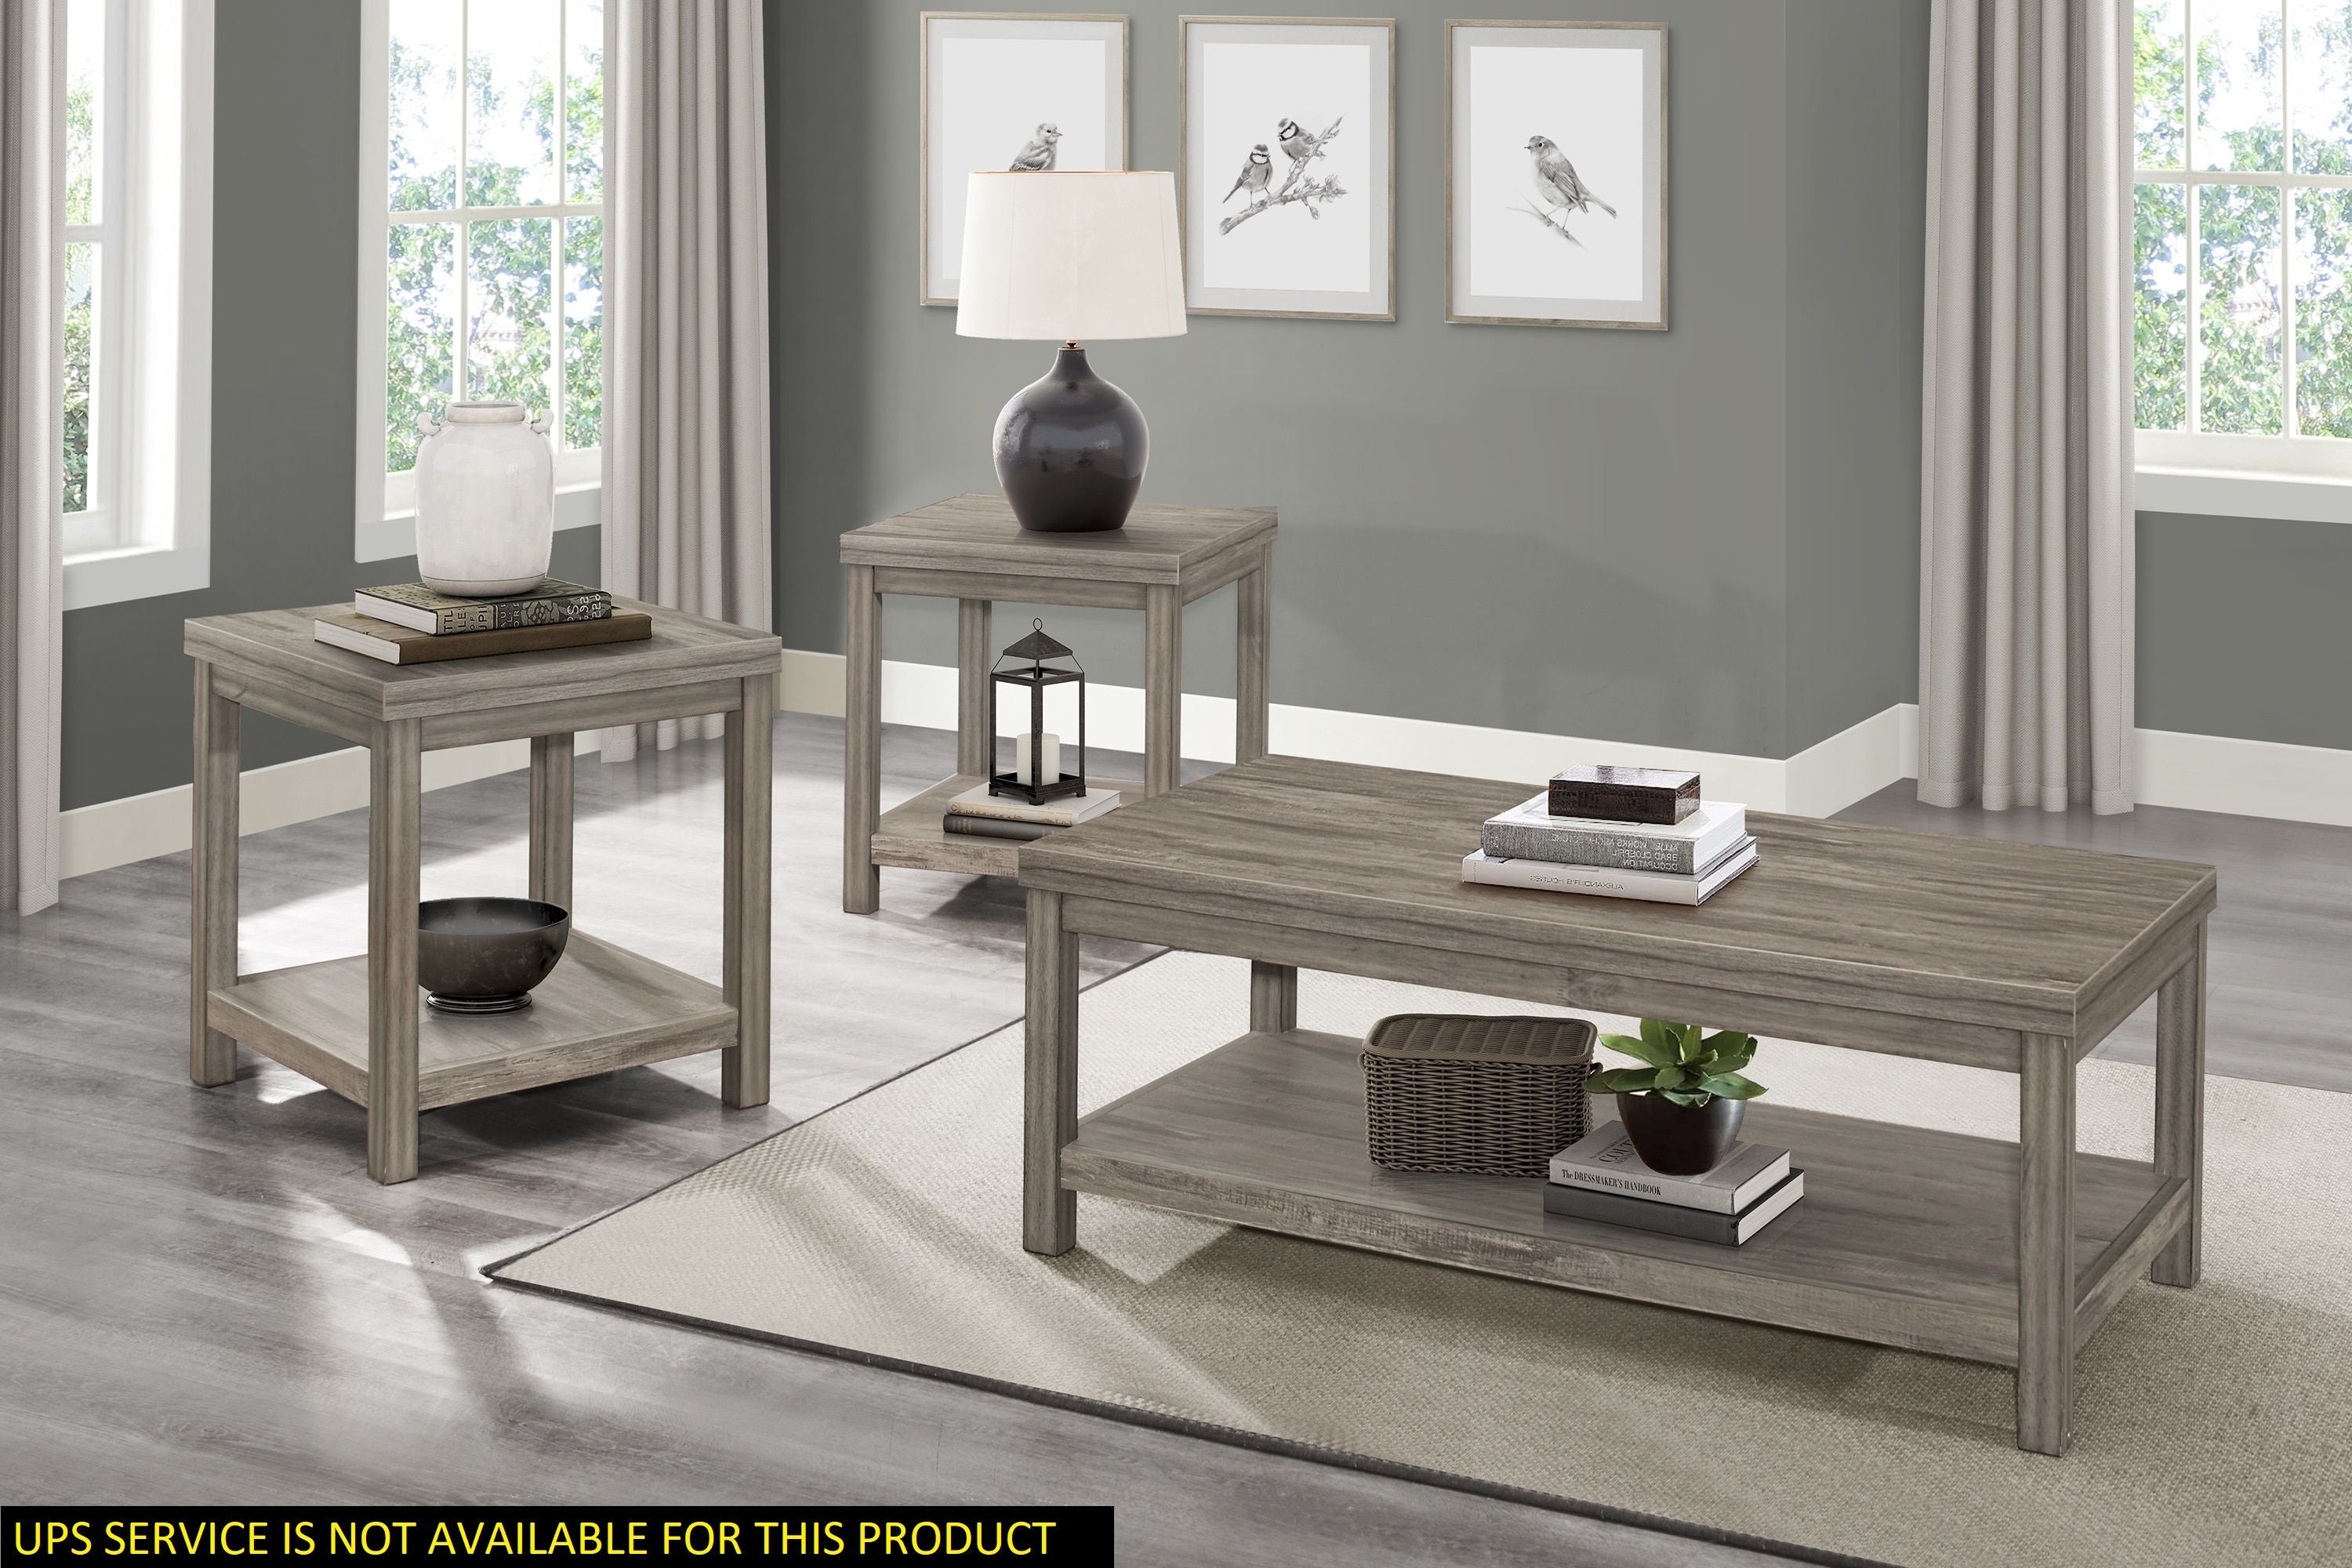 Transitional 3 Pieces Table Set Occasional Tables Living Room Furniture 1X Coffee Table And 2X End Tables Melamine Laminate Rustic Style